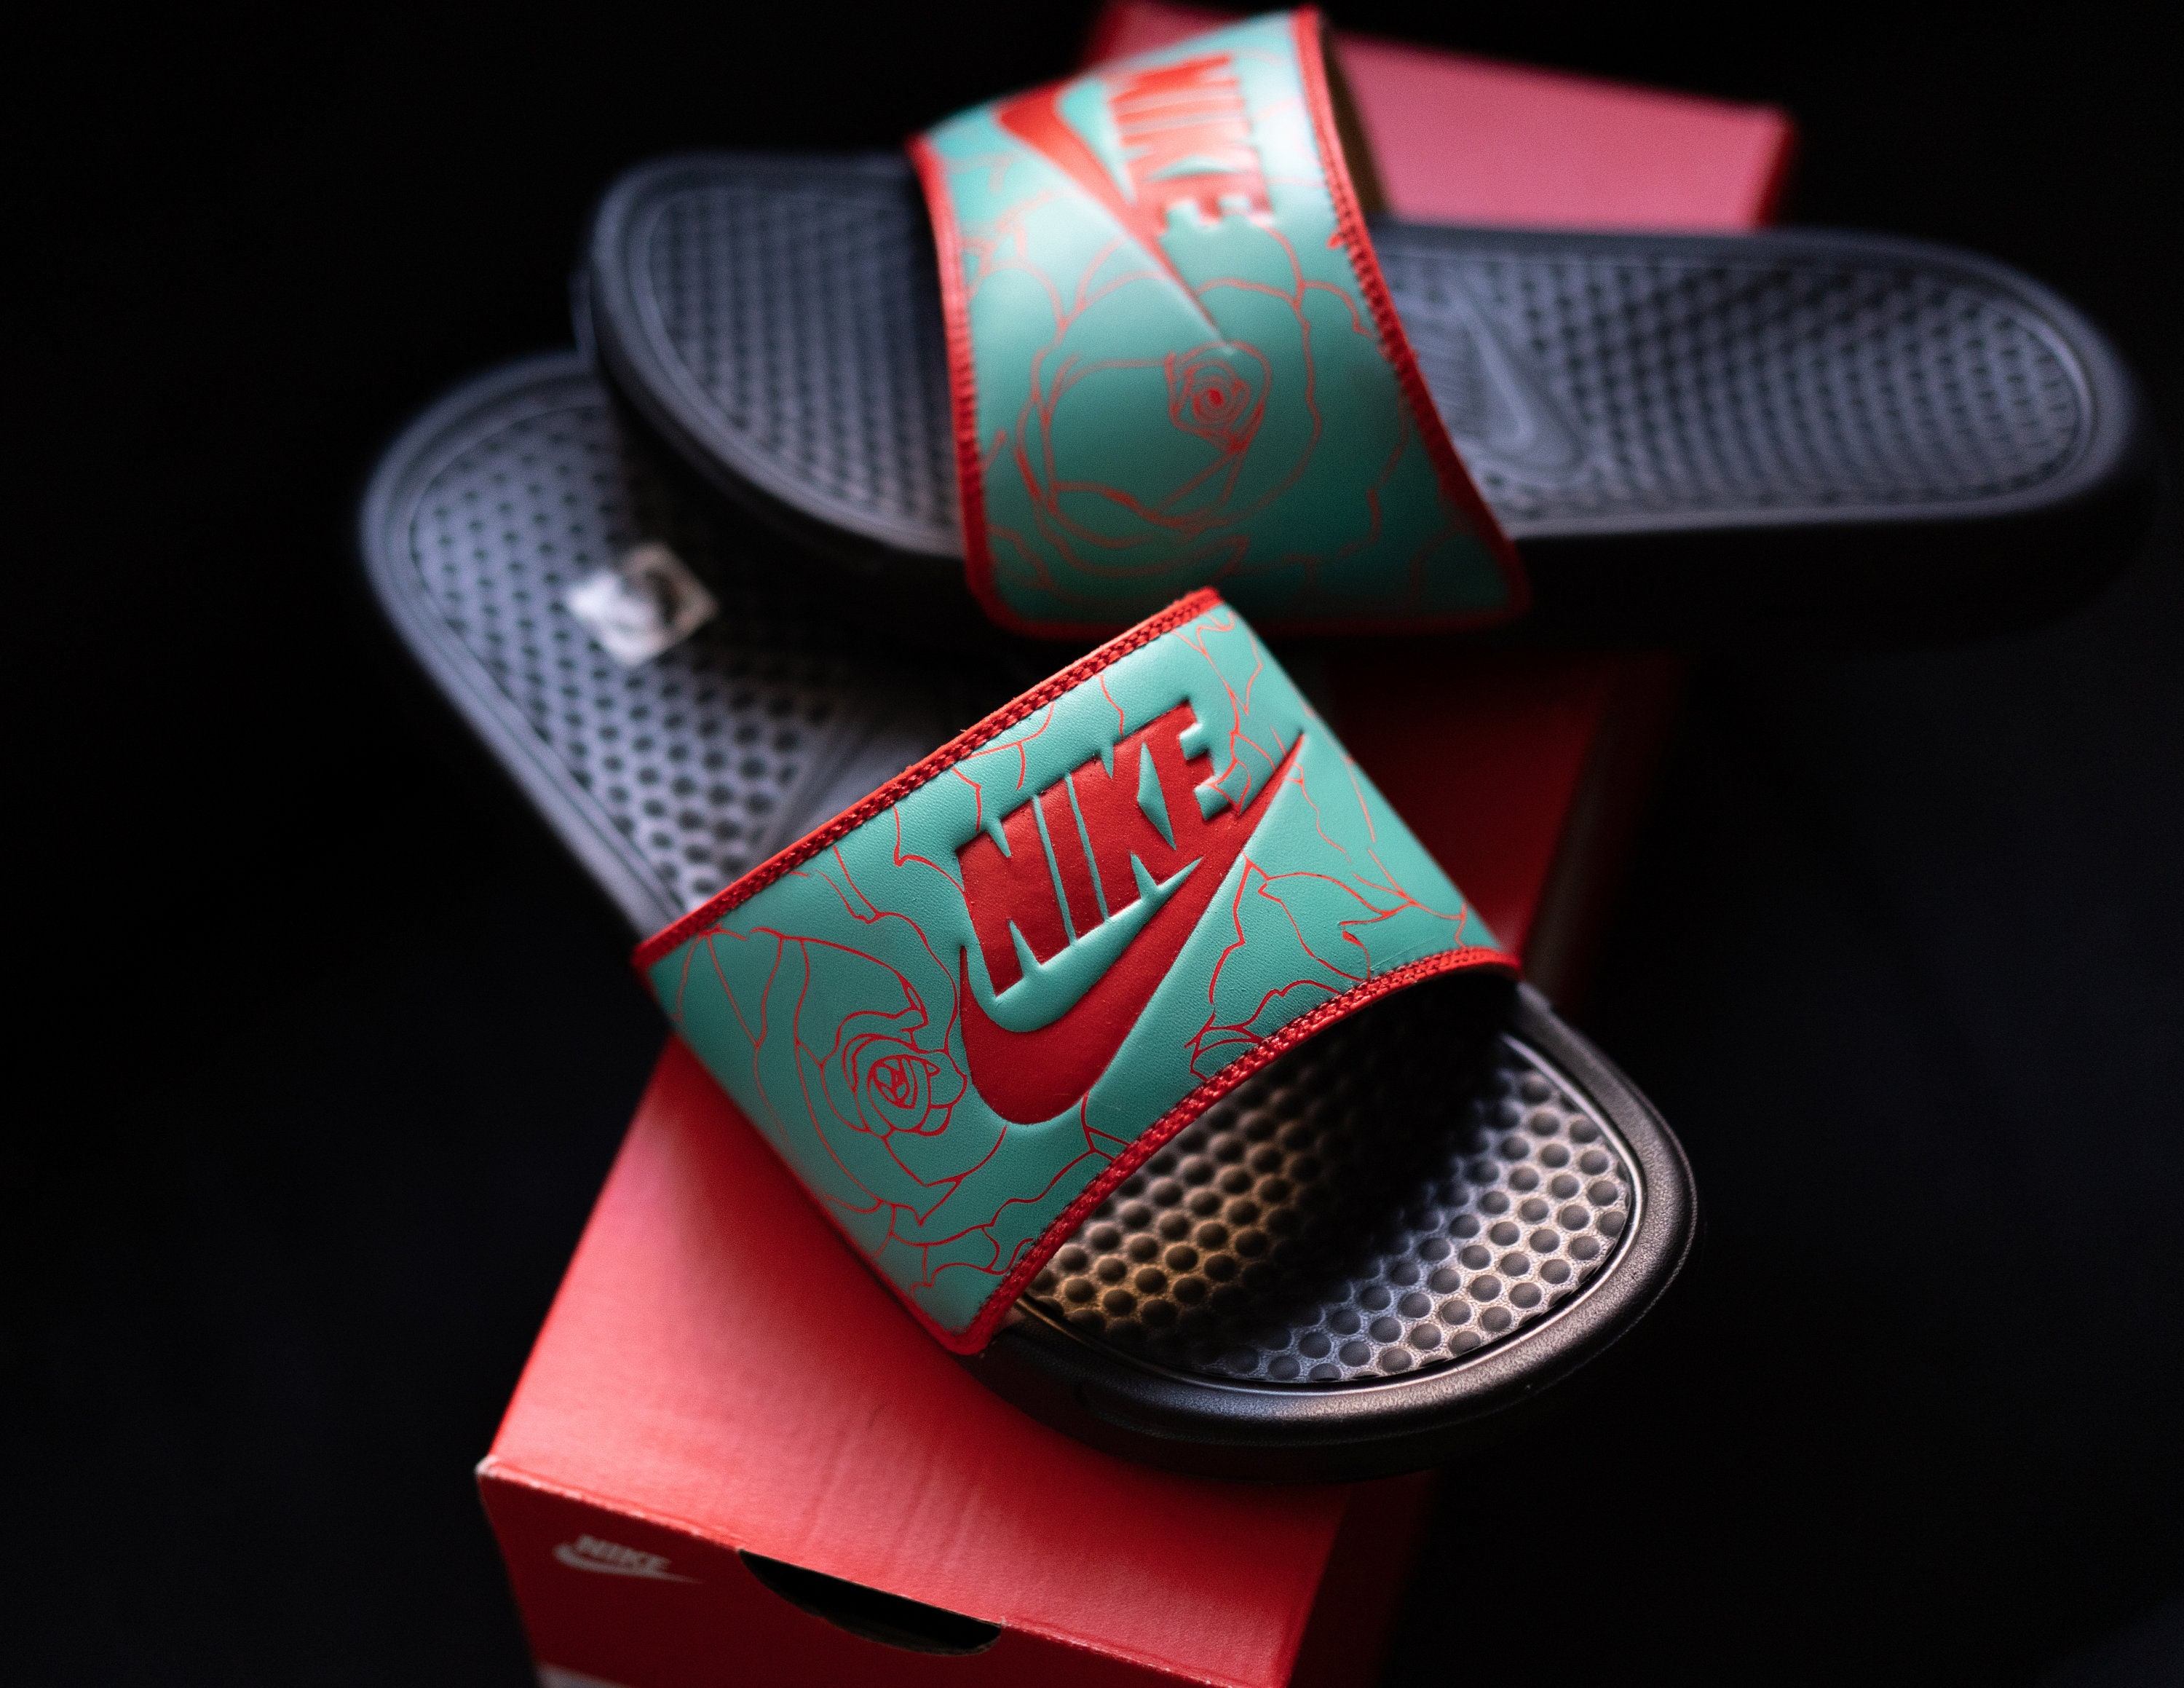 Rose Nike Slides Customs Teal and Red 